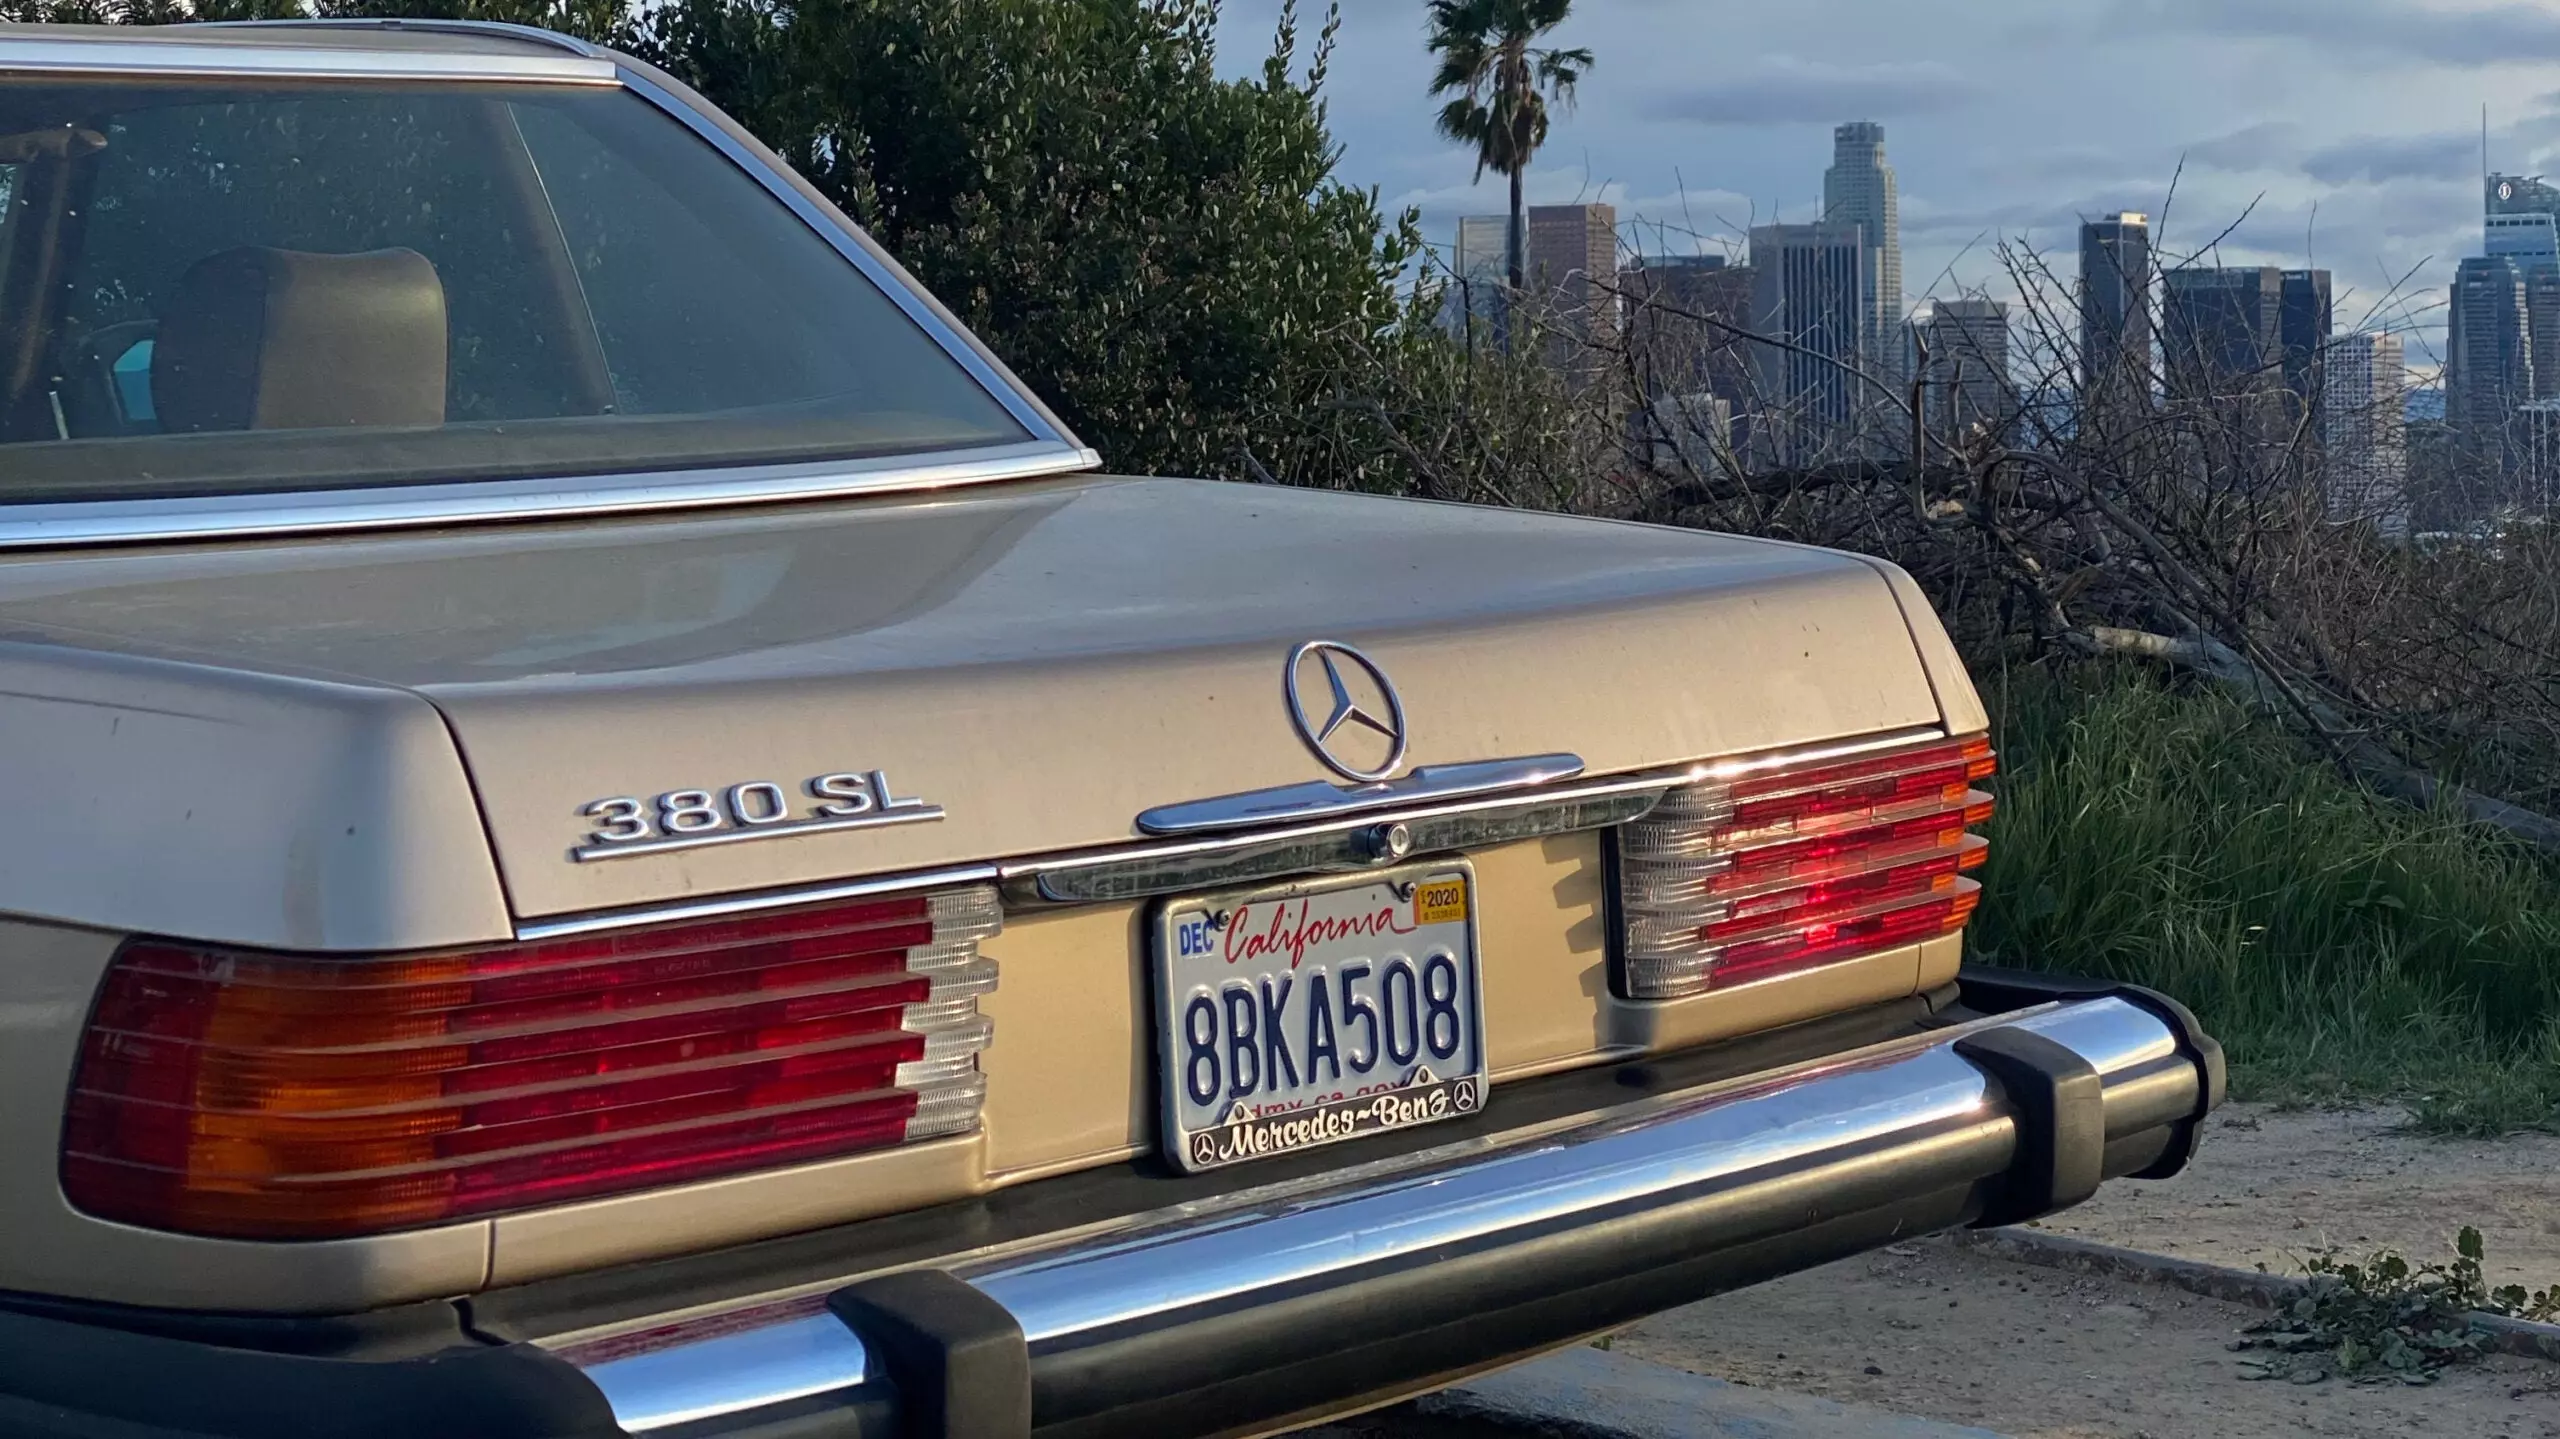 You Won’t Find Stronger Los Angeles Vibes Than the Aura of This Old Mercedes SL | Autance